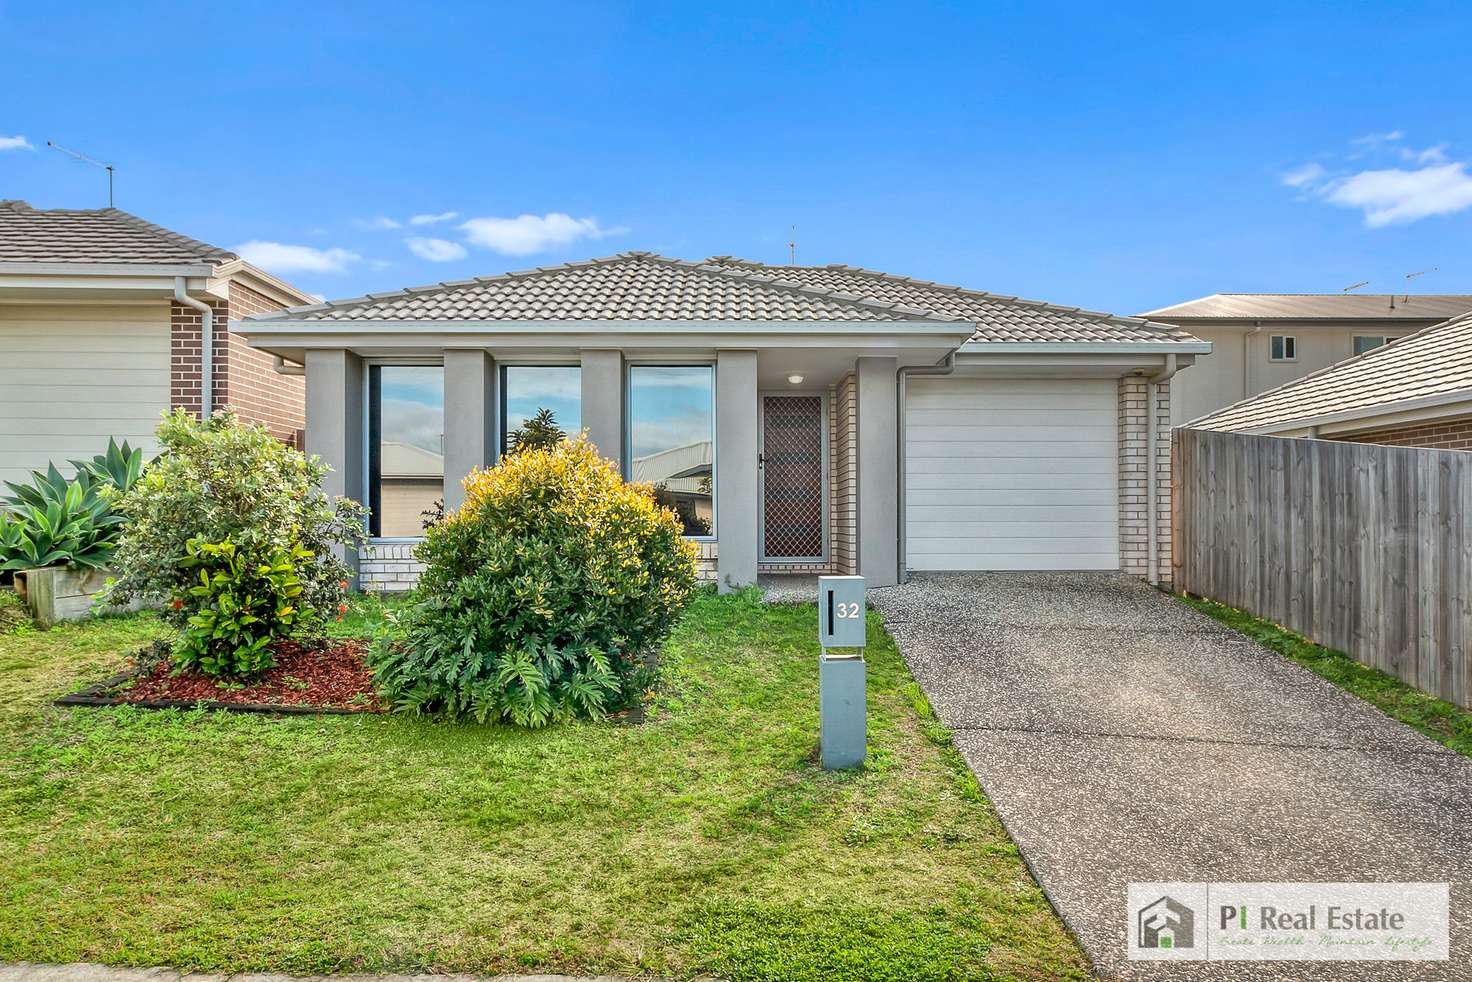 Main view of Homely house listing, 32 Leigh crescent, Dakabin QLD 4503